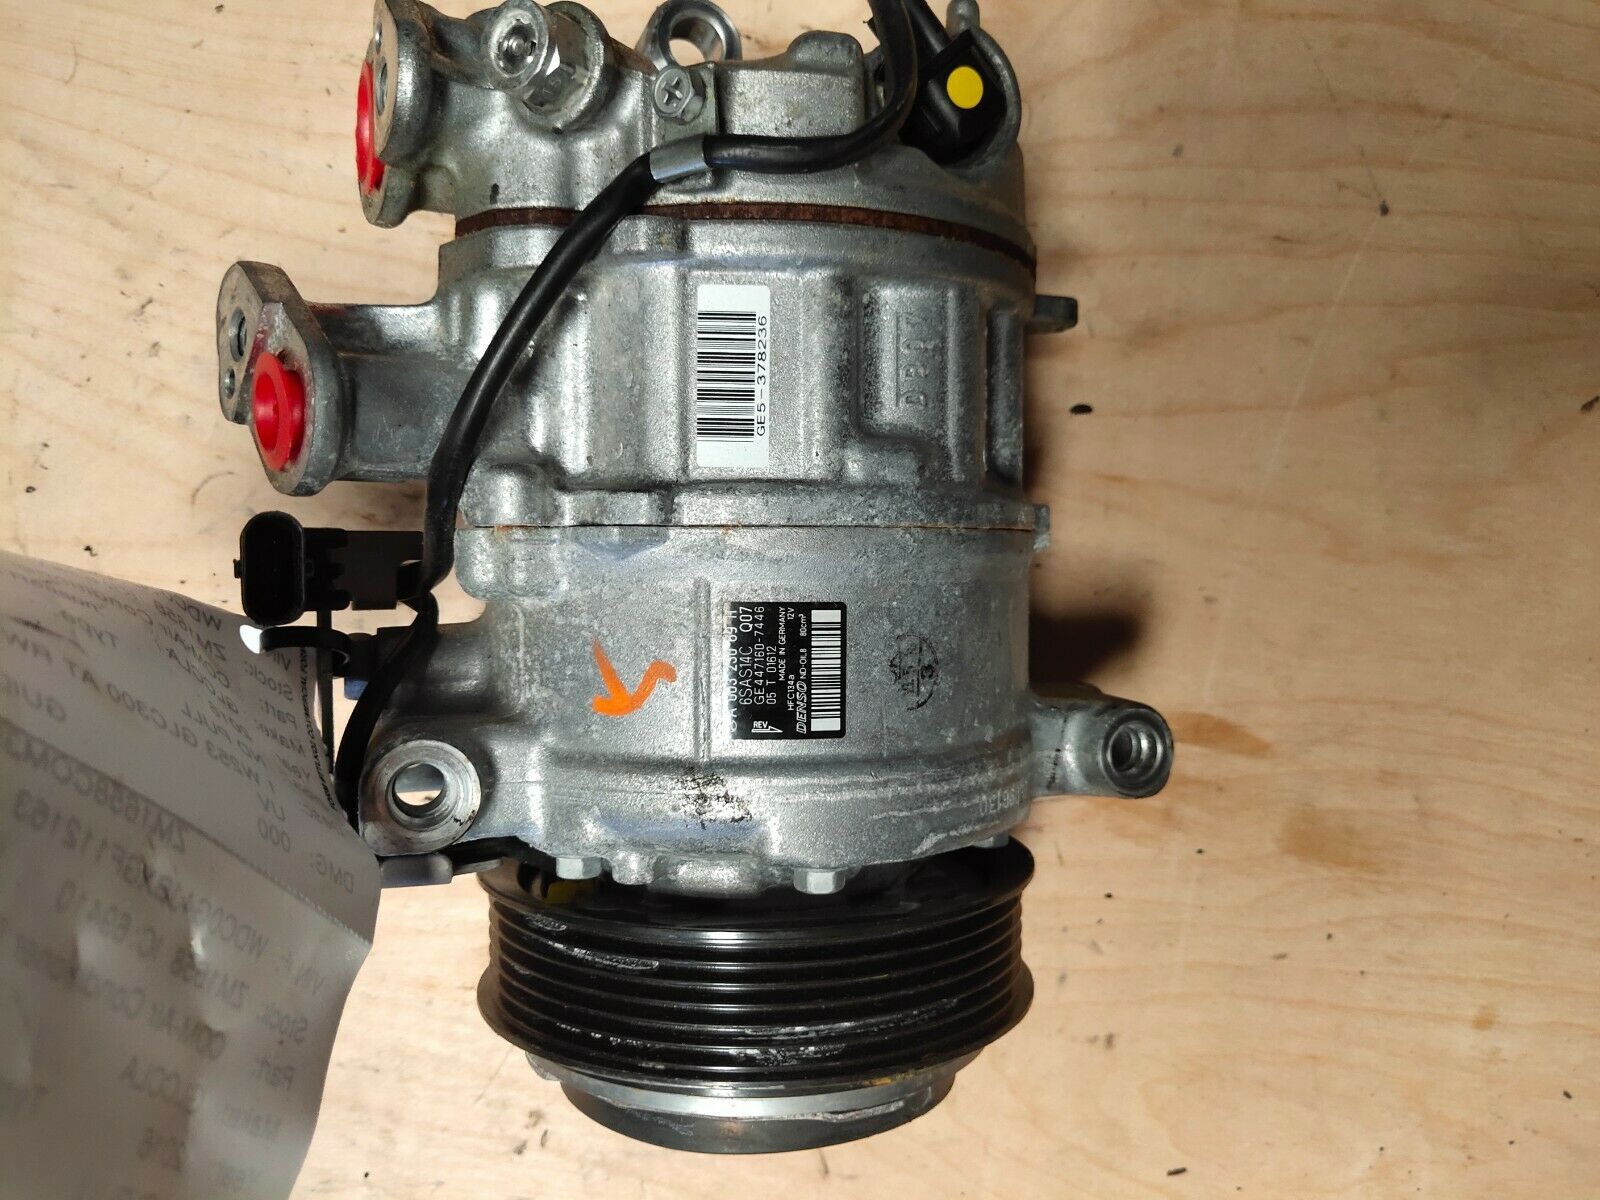 Are Ac Compressors Interchangeable?